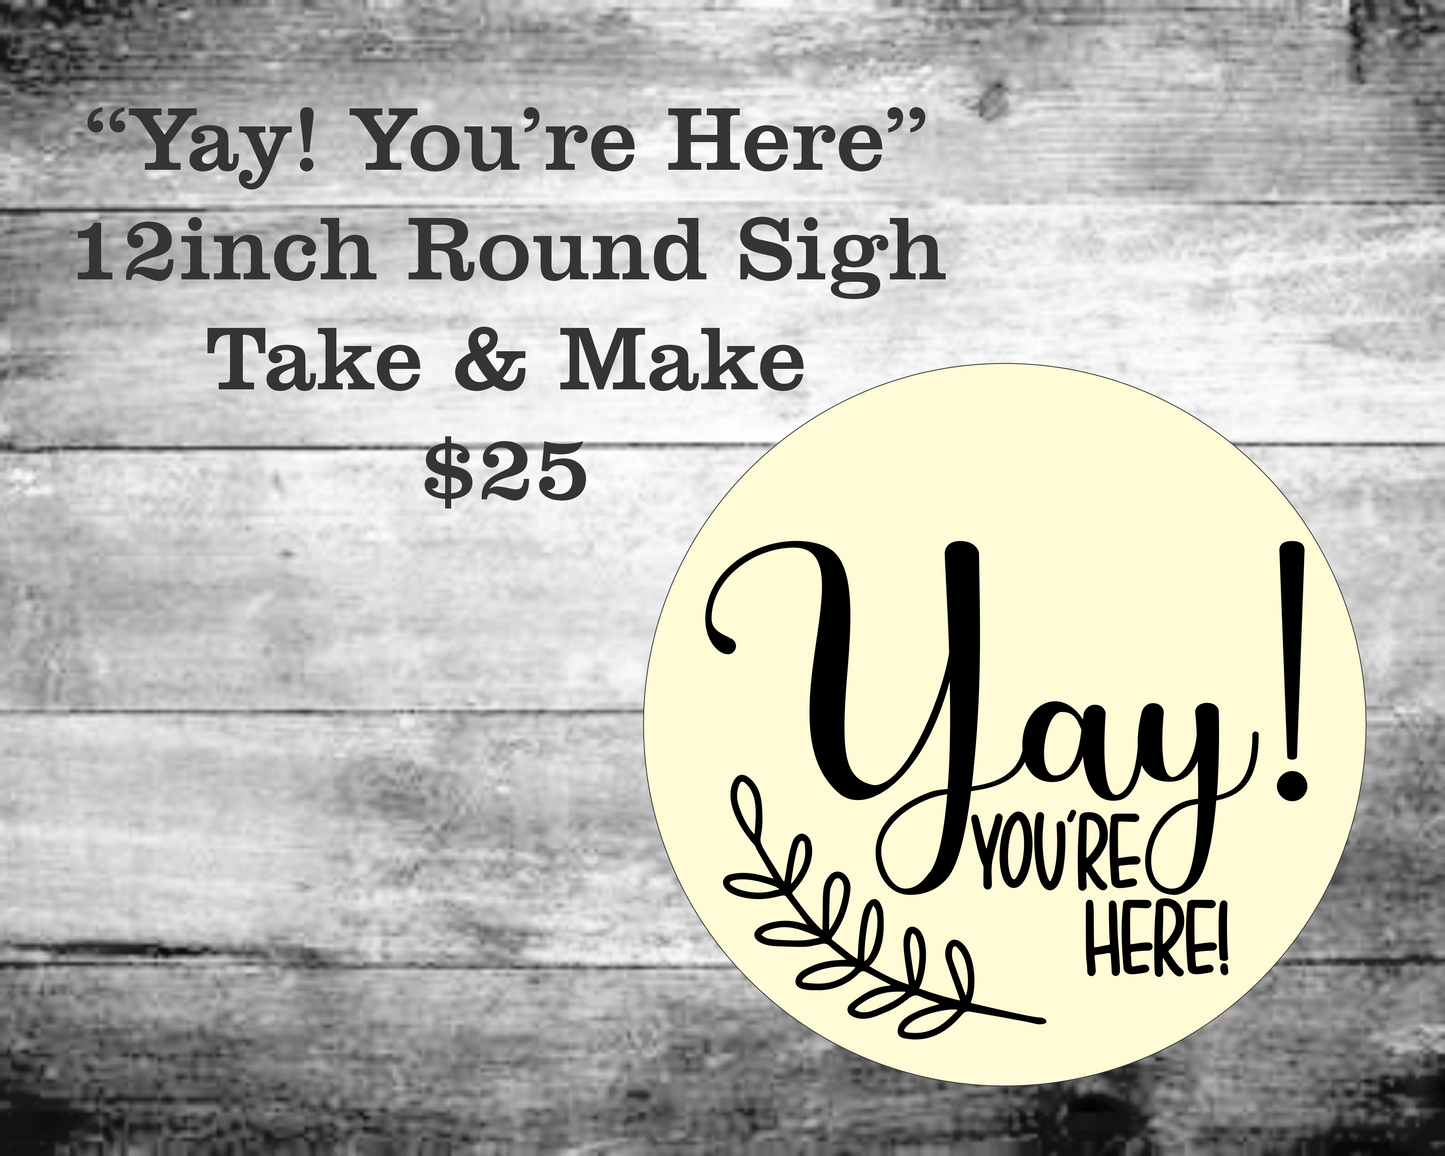 Yay! You're Here Round Sign Kit